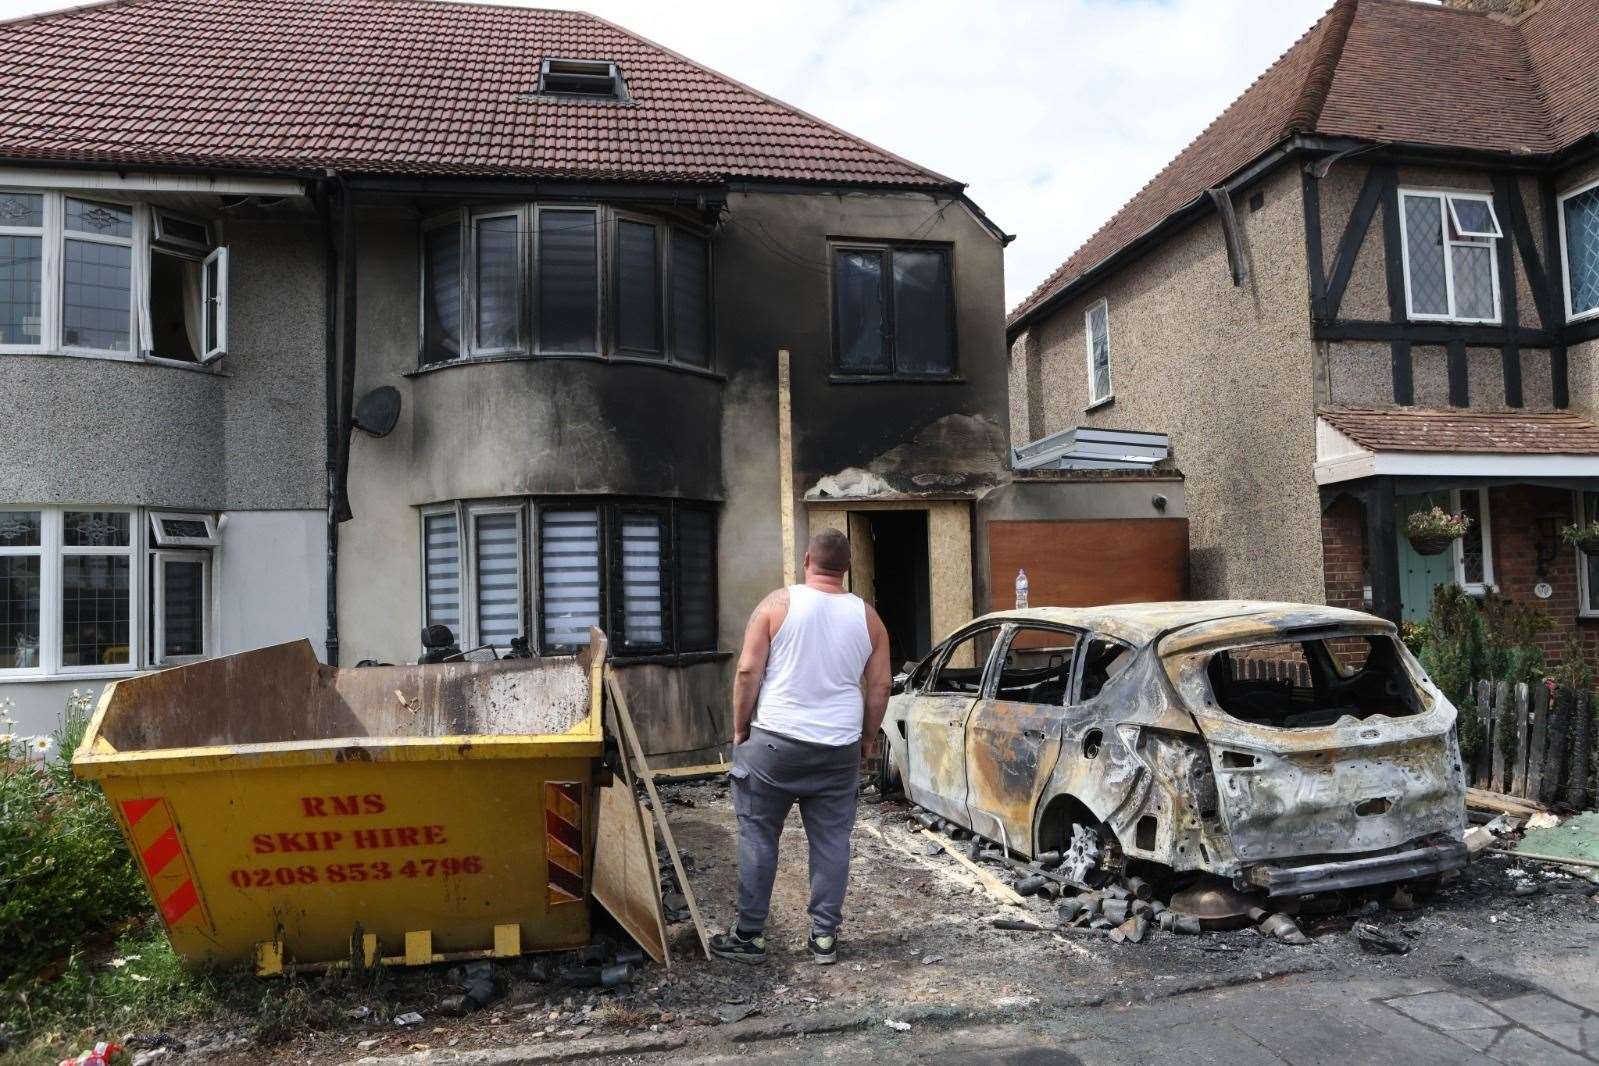 TikTok-star family The Smithy's have been targeted by arsonists